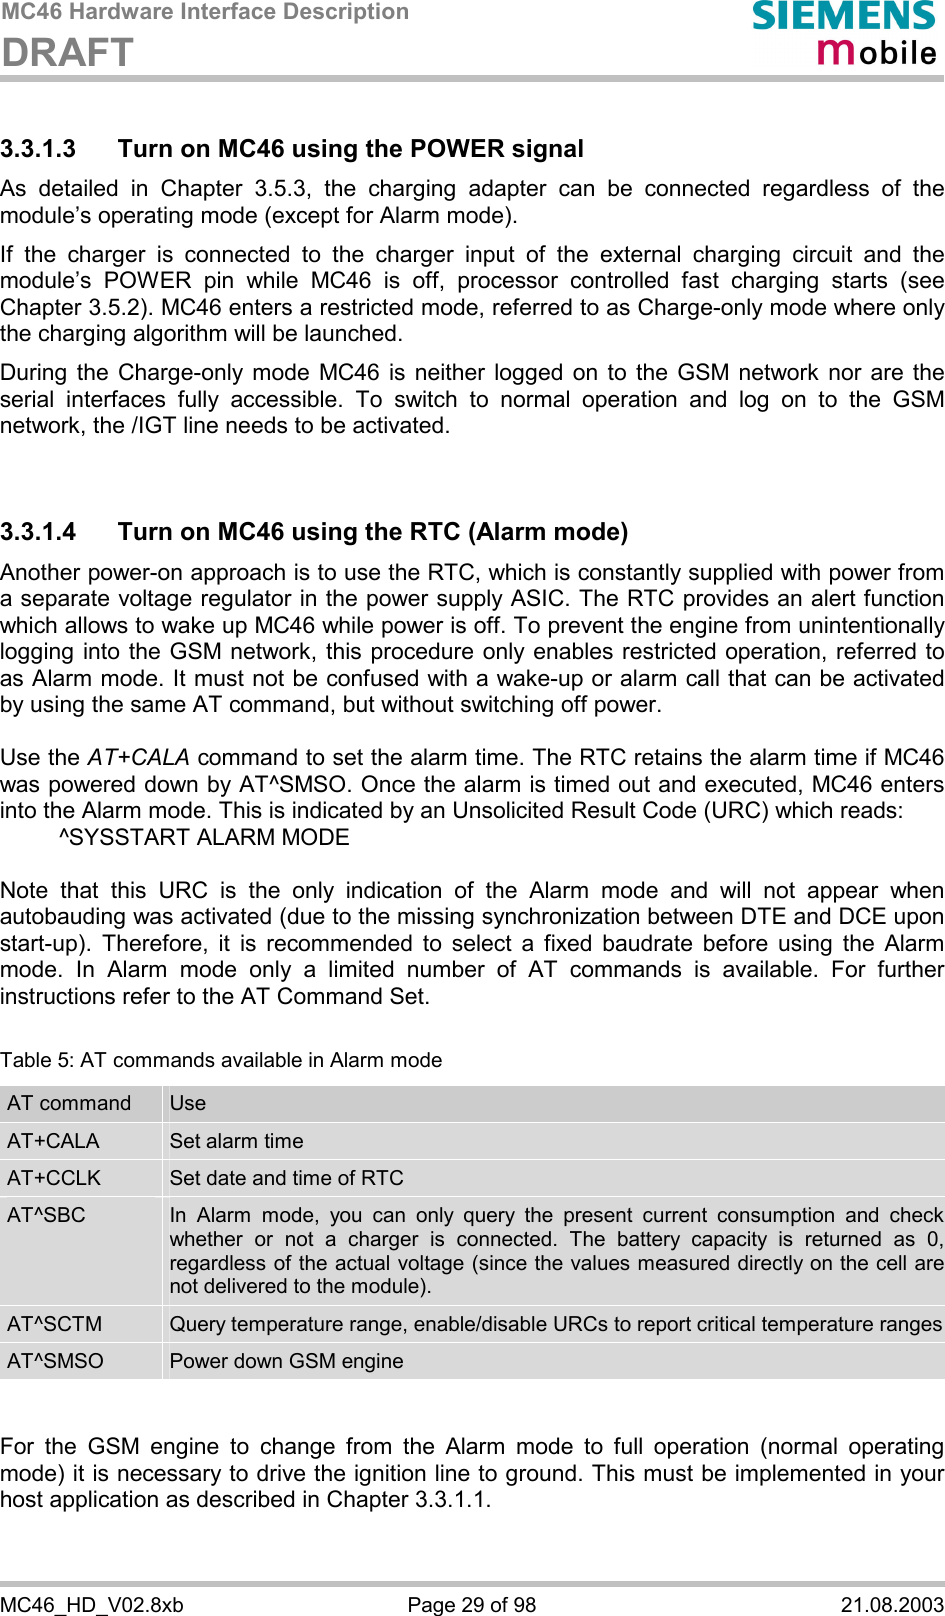 MC46 Hardware Interface Description DRAFT      MC46_HD_V02.8xb  Page 29 of 98  21.08.2003 3.3.1.3  Turn on MC46 using the POWER signal As detailed in Chapter 3.5.3, the charging adapter can be connected regardless of the module’s operating mode (except for Alarm mode).  If the charger is connected to the charger input of the external charging circuit and the module’s POWER pin while MC46 is off, processor controlled fast charging starts (see Chapter 3.5.2). MC46 enters a restricted mode, referred to as Charge-only mode where only the charging algorithm will be launched. During the Charge-only mode MC46 is neither logged on to the GSM network nor are the serial interfaces fully accessible. To switch to normal operation and log on to the GSM network, the /IGT line needs to be activated.   3.3.1.4  Turn on MC46 using the RTC (Alarm mode) Another power-on approach is to use the RTC, which is constantly supplied with power from a separate voltage regulator in the power supply ASIC. The RTC provides an alert function which allows to wake up MC46 while power is off. To prevent the engine from unintentionally logging into the GSM network, this procedure only enables restricted operation, referred to as Alarm mode. It must not be confused with a wake-up or alarm call that can be activated by using the same AT command, but without switching off power.  Use the AT+CALA command to set the alarm time. The RTC retains the alarm time if MC46 was powered down by AT^SMSO. Once the alarm is timed out and executed, MC46 enters into the Alarm mode. This is indicated by an Unsolicited Result Code (URC) which reads:   ^SYSSTART ALARM MODE    Note that this URC is the only indication of the Alarm mode and will not appear when autobauding was activated (due to the missing synchronization between DTE and DCE upon start-up). Therefore, it is recommended to select a fixed baudrate before using the Alarm mode. In Alarm mode only a limited number of AT commands is available. For further instructions refer to the AT Command Set.  Table 5: AT commands available in Alarm mode AT command  Use AT+CALA  Set alarm time AT+CCLK  Set date and time of RTC AT^SBC  In Alarm mode, you can only query the present current consumption and check whether or not a charger is connected. The battery capacity is returned as 0, regardless of the actual voltage (since the values measured directly on the cell are not delivered to the module). AT^SCTM  Query temperature range, enable/disable URCs to report critical temperature rangesAT^SMSO  Power down GSM engine   For the GSM engine to change from the Alarm mode to full operation (normal operating mode) it is necessary to drive the ignition line to ground. This must be implemented in your host application as described in Chapter 3.3.1.1.   